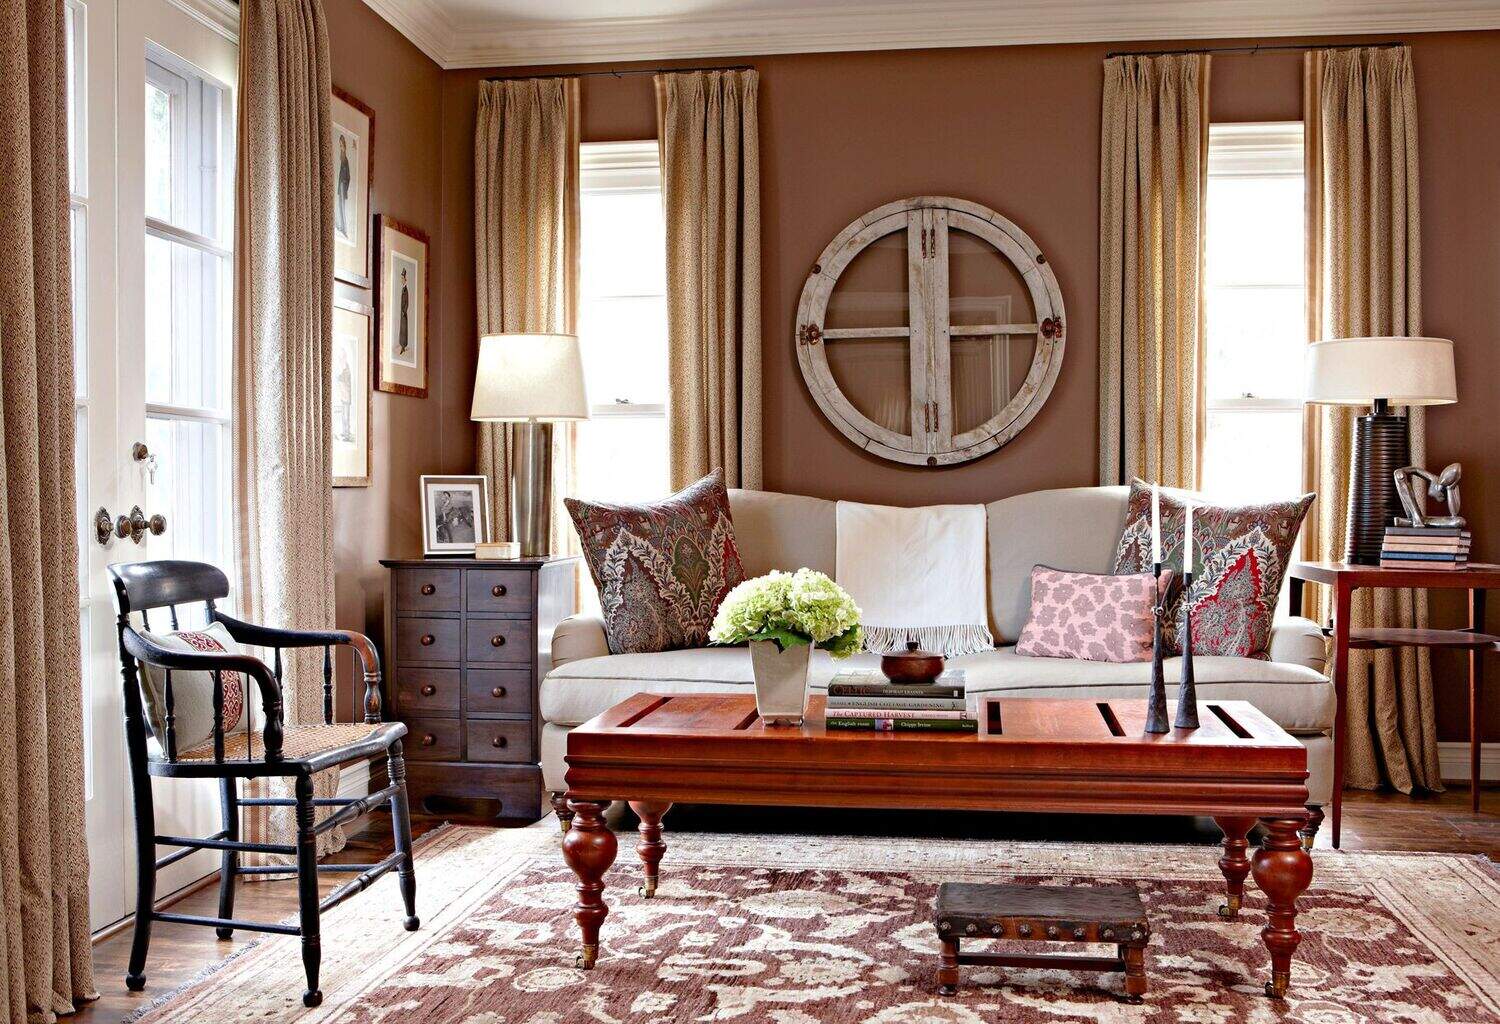 What Color Drapes Go With Brown Walls